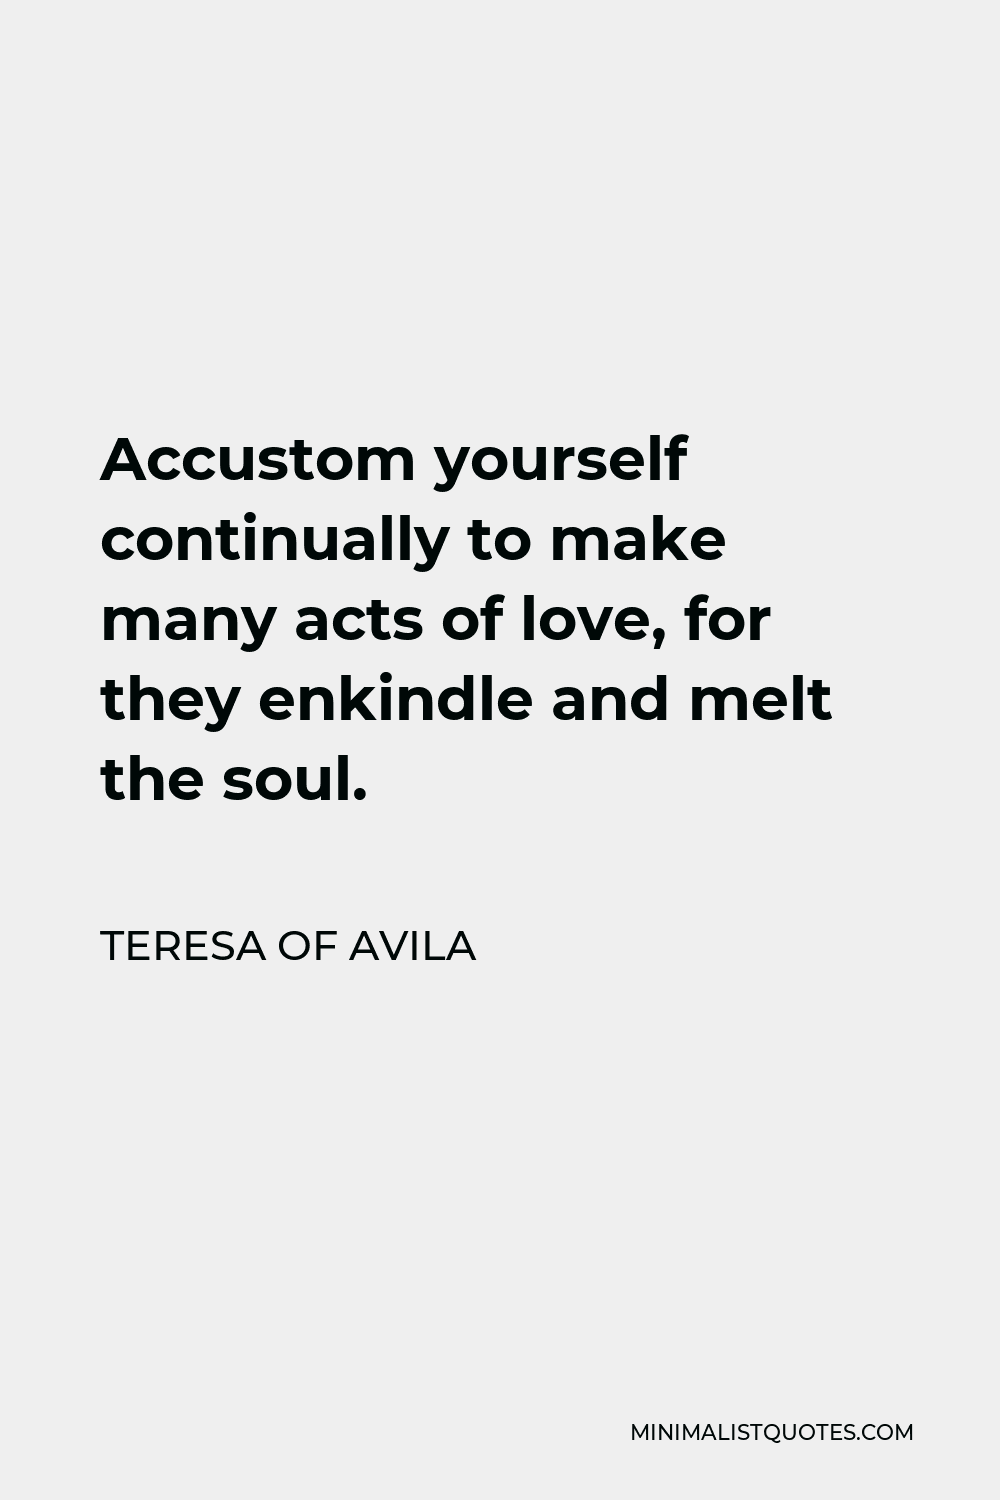 Teresa of Avila Quote - Accustom yourself continually to make many acts of love, for they enkindle and melt the soul.